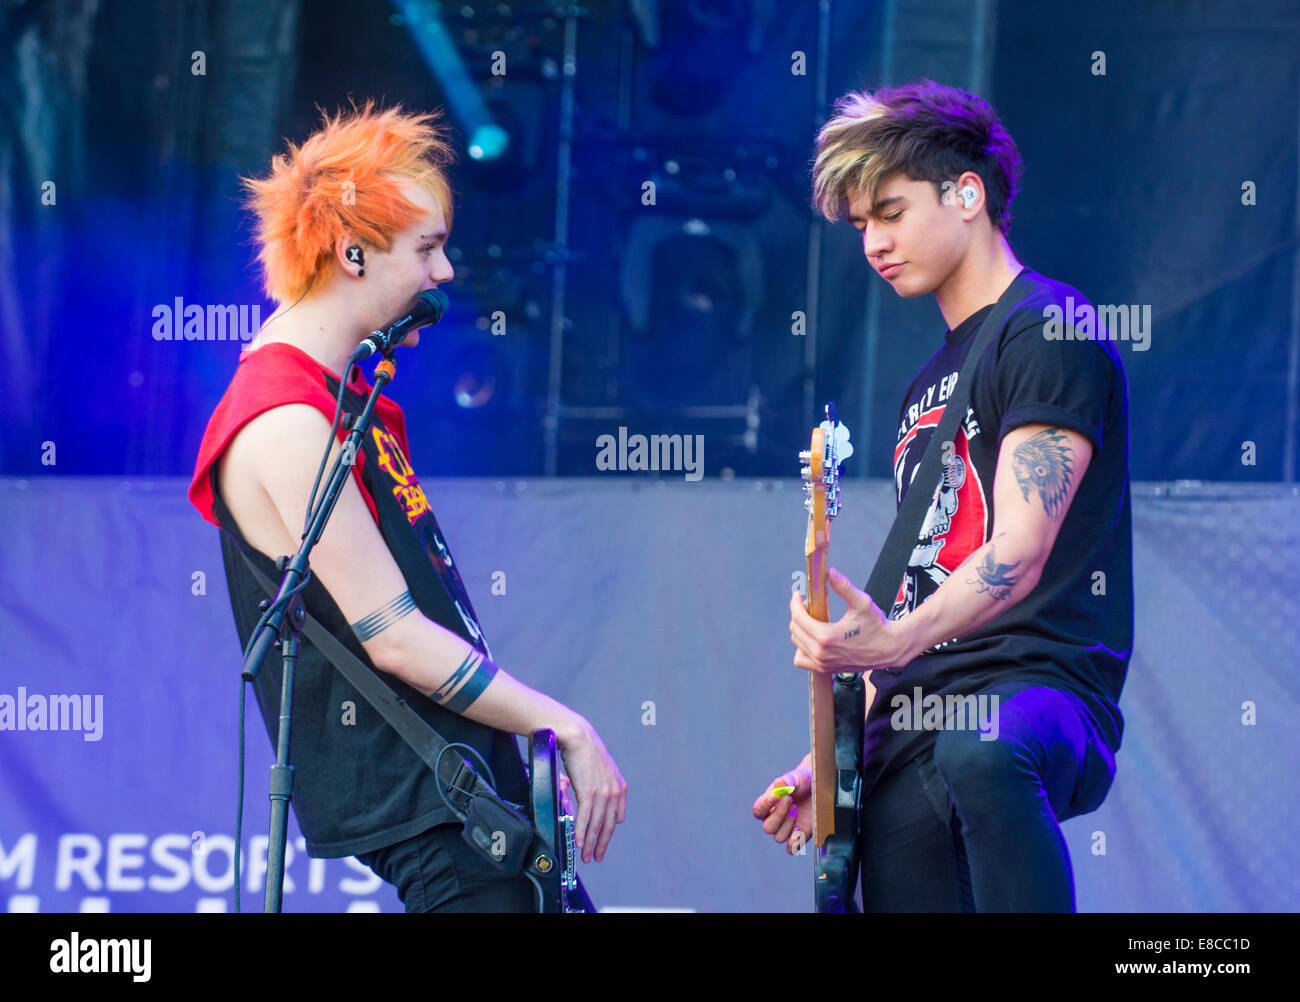 Rock band 5 Seconds of Summer performs on stage at the 2014 iHeartRadio Music Festival Village in Las Vegas. Stock Photo